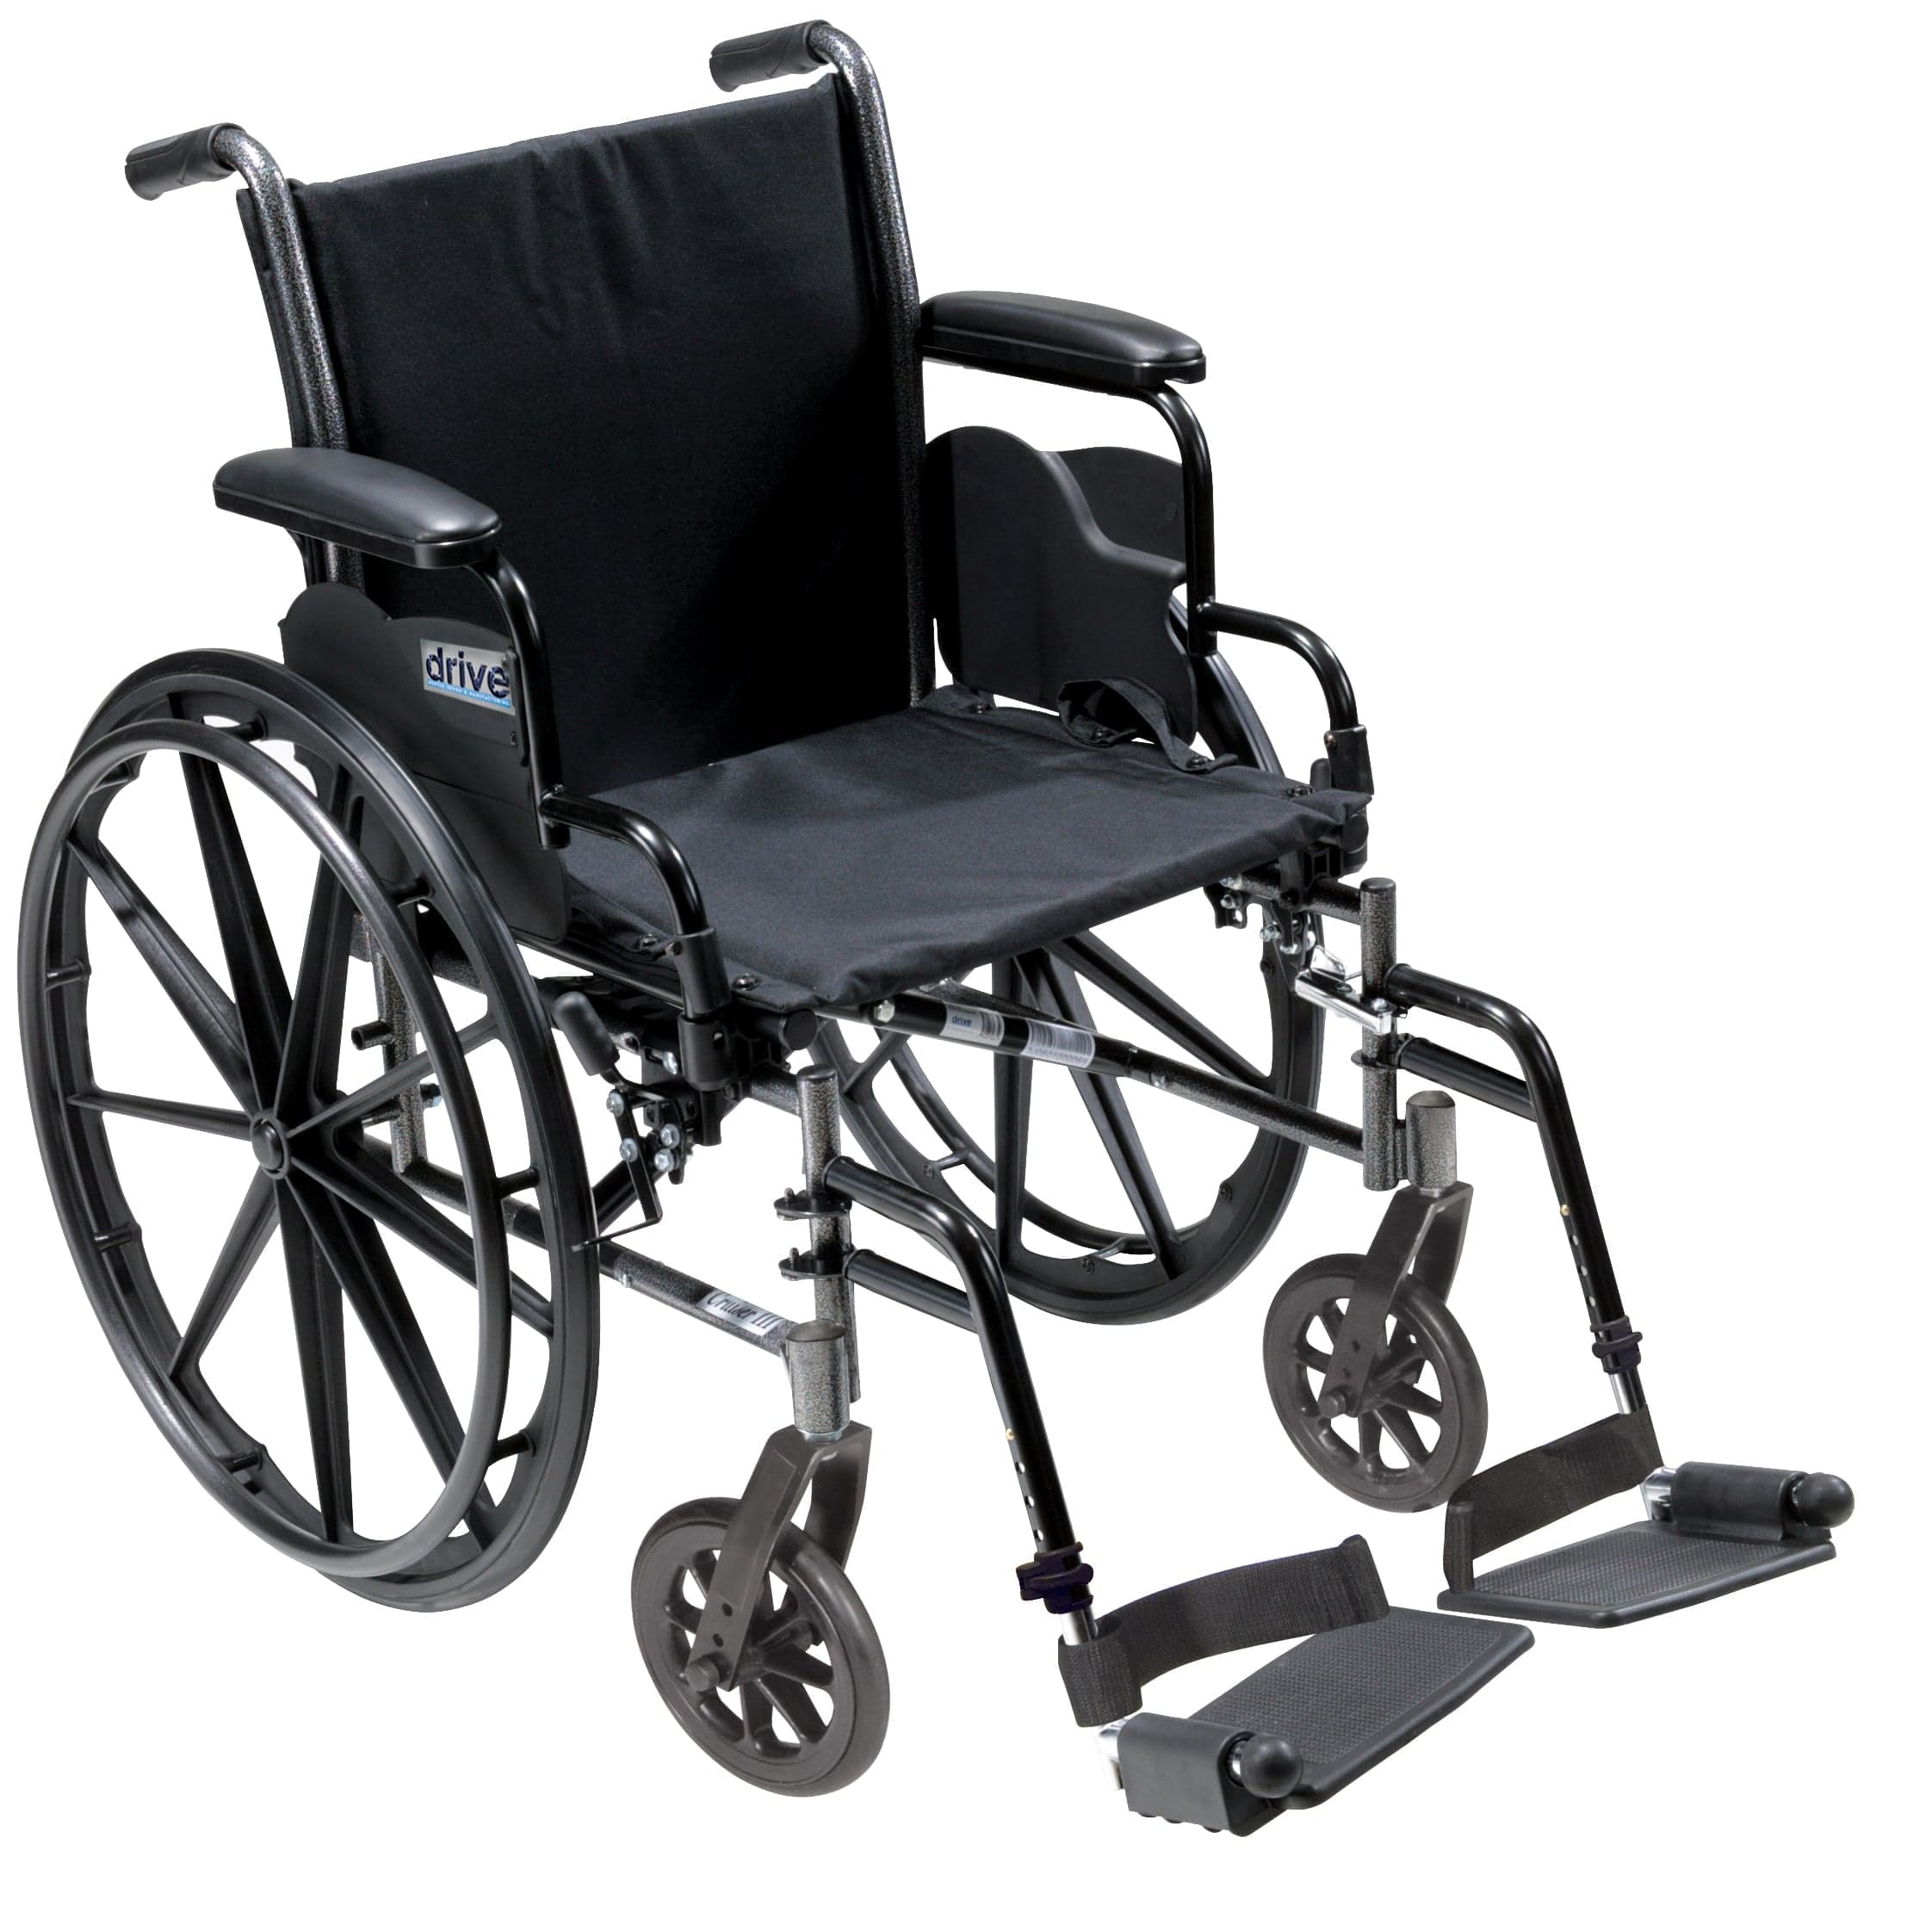 Drive Medical Wheelchairs Flip Back Removable Desk Arms and Swing away Footrests / 16" Seat Drive Medical Cruiser III Light Weight Wheelchair with Flip Back Removable Arms